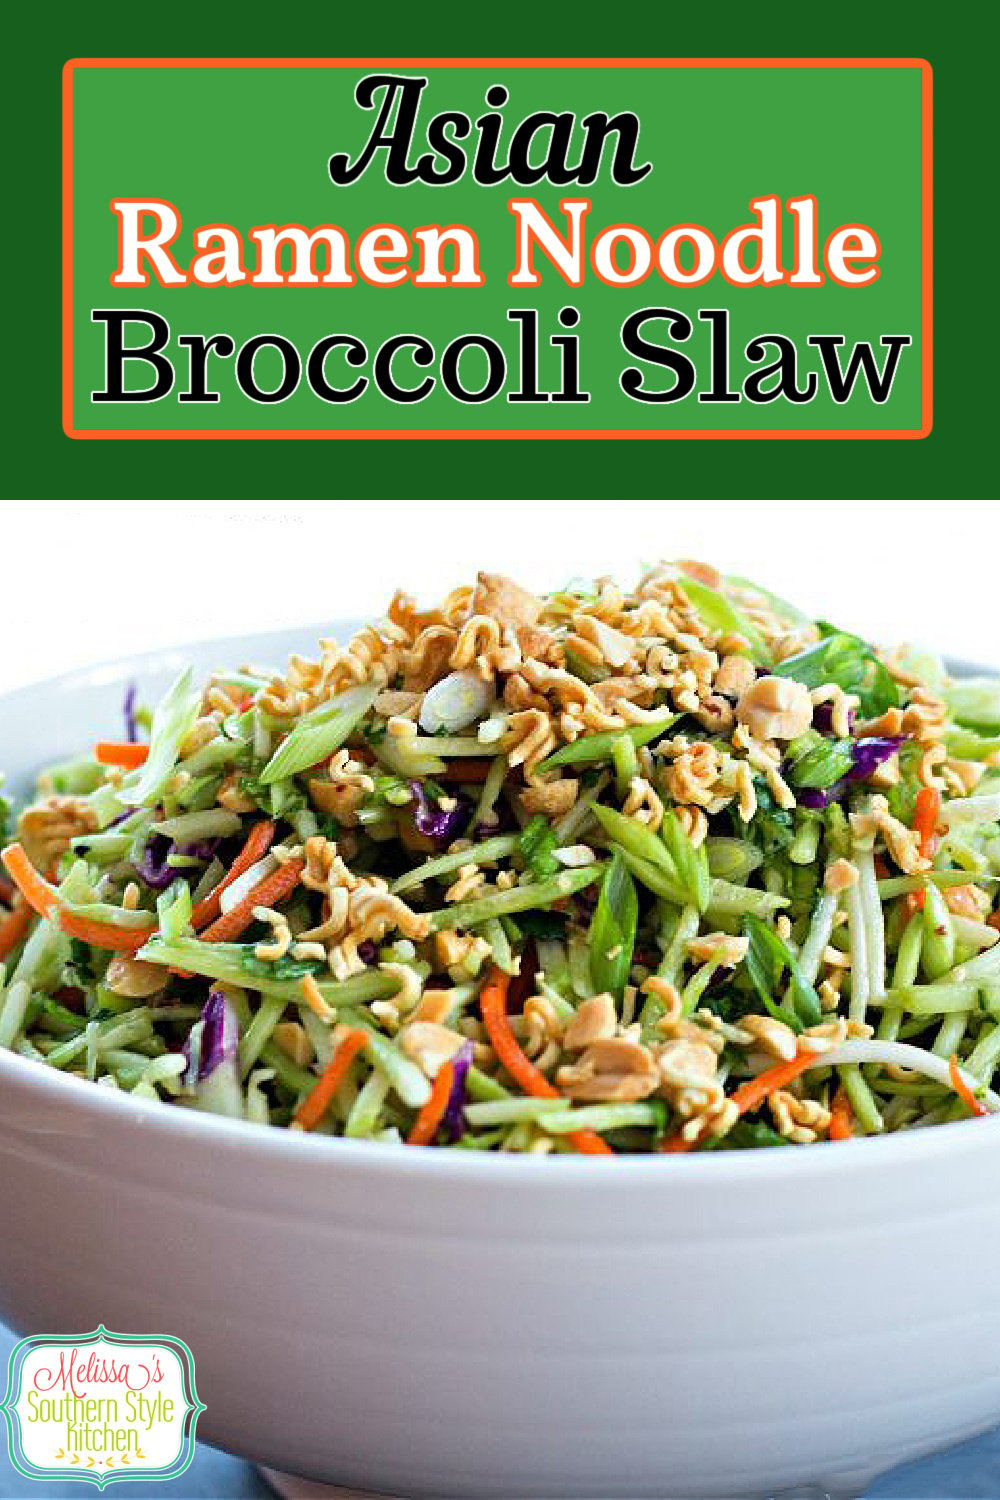 You'll add crunch and color to your side dish menu with this scrumptious Asian Ramen Noodle Broccoli Slaw #broccolisalw #ramen #Asianinspired #salads #broccoli #vegetarian #picnicfood #sidedishrecipes #southernfood #southernrecipes #slaw via @melissasssk